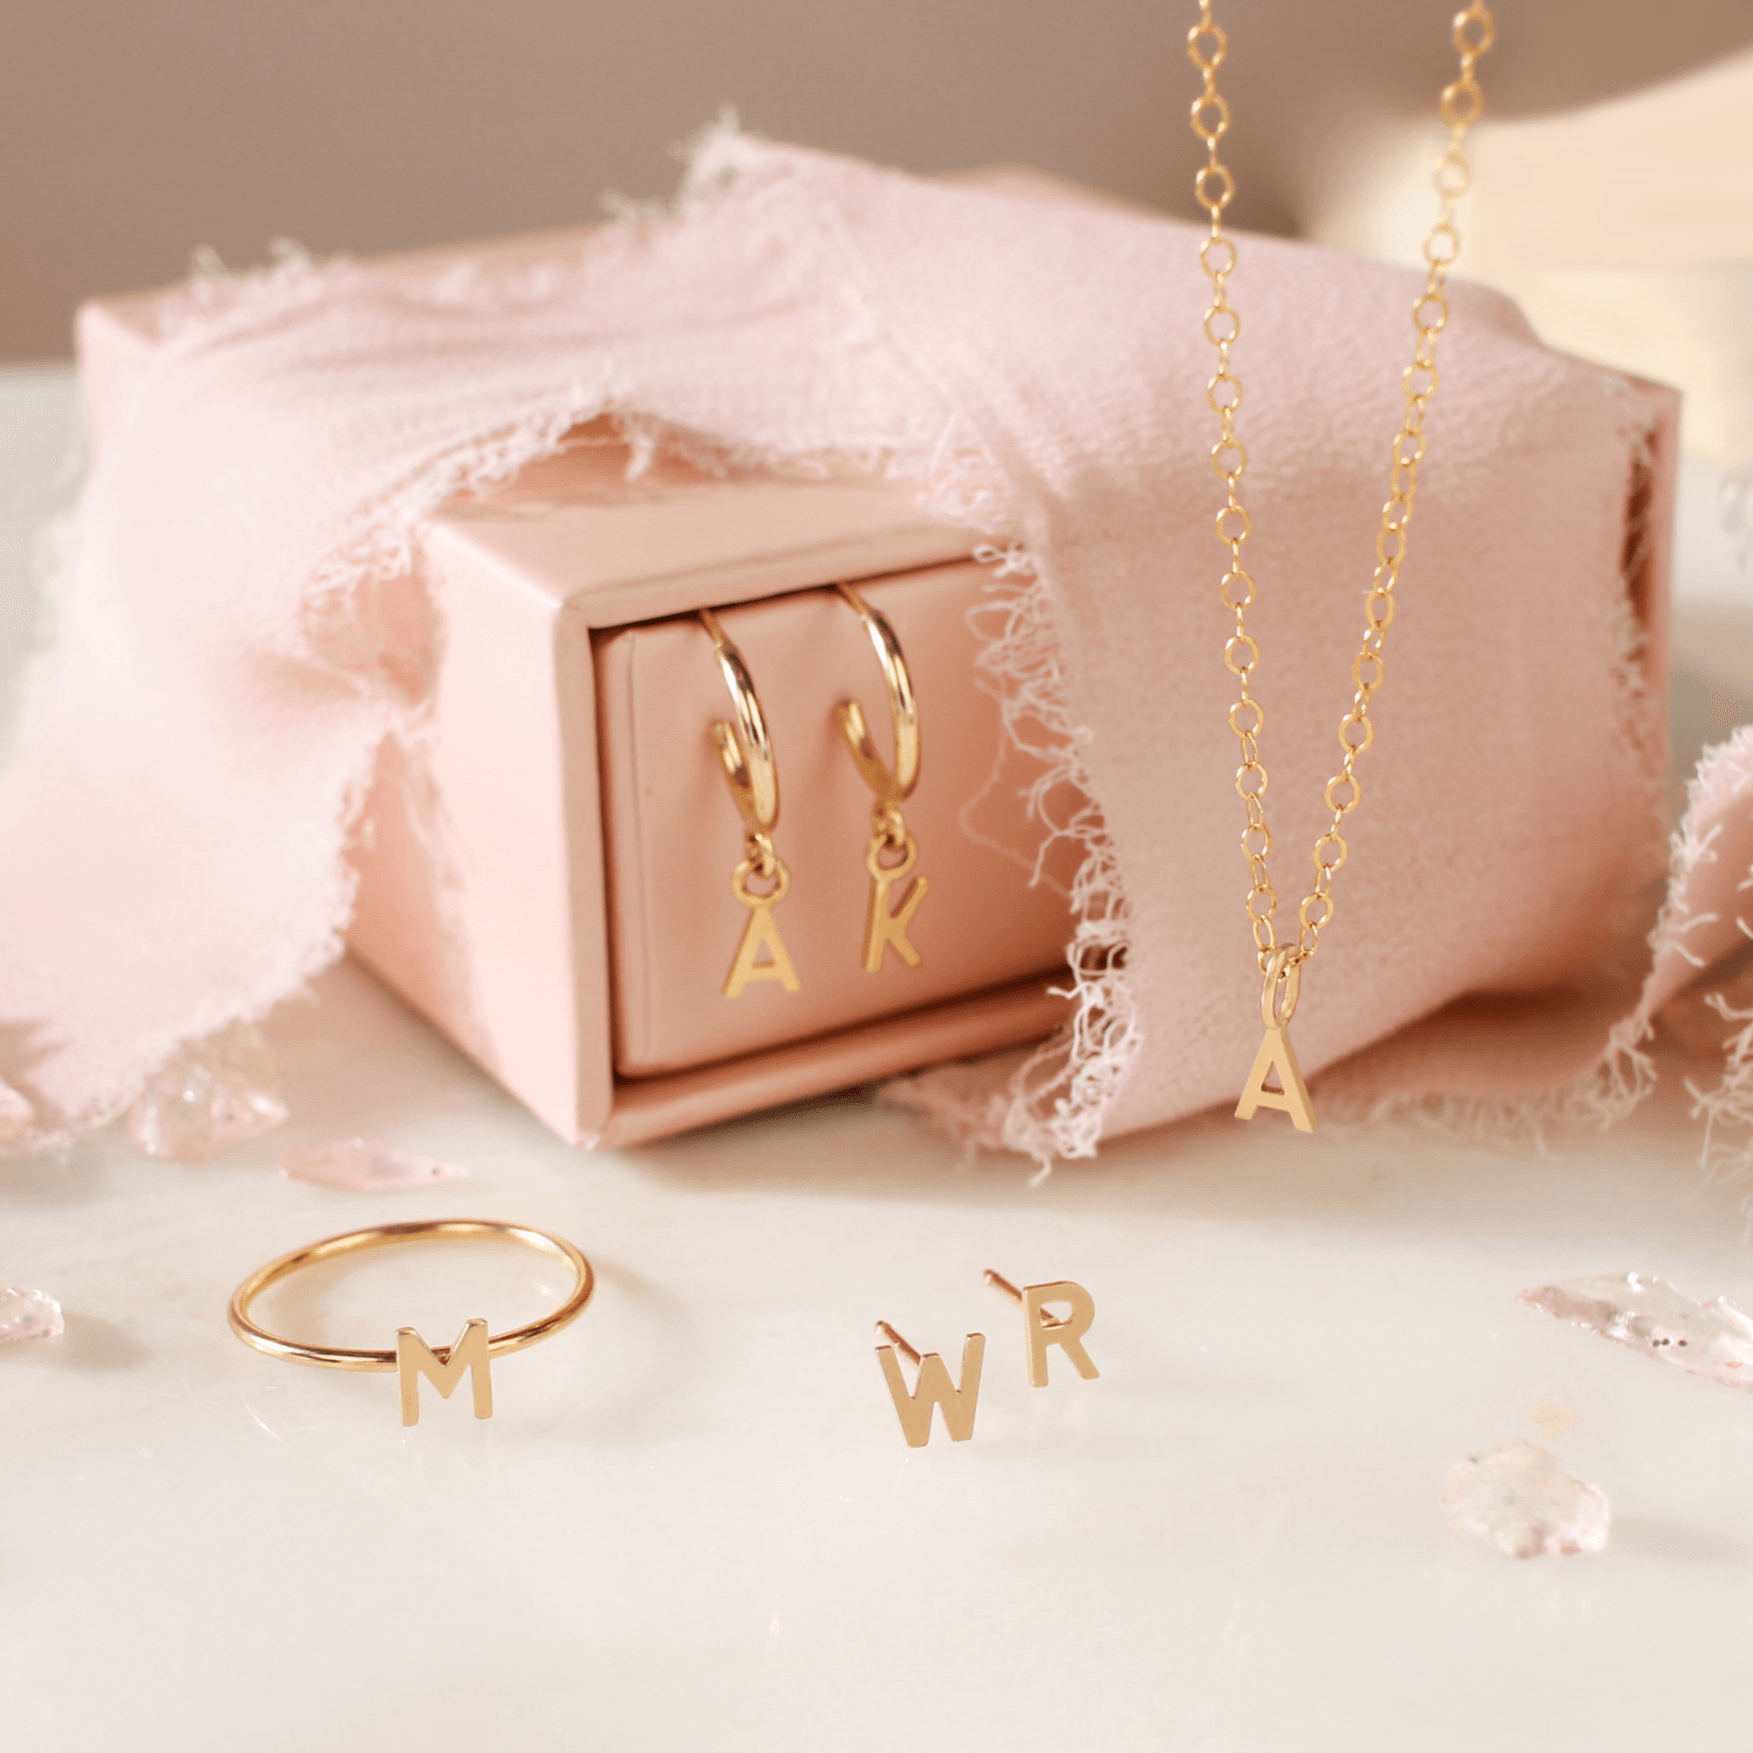 Ava Initial Necklace - Nolia Jewelry - Meaningful + Sustainably Handcrafted Jewelry